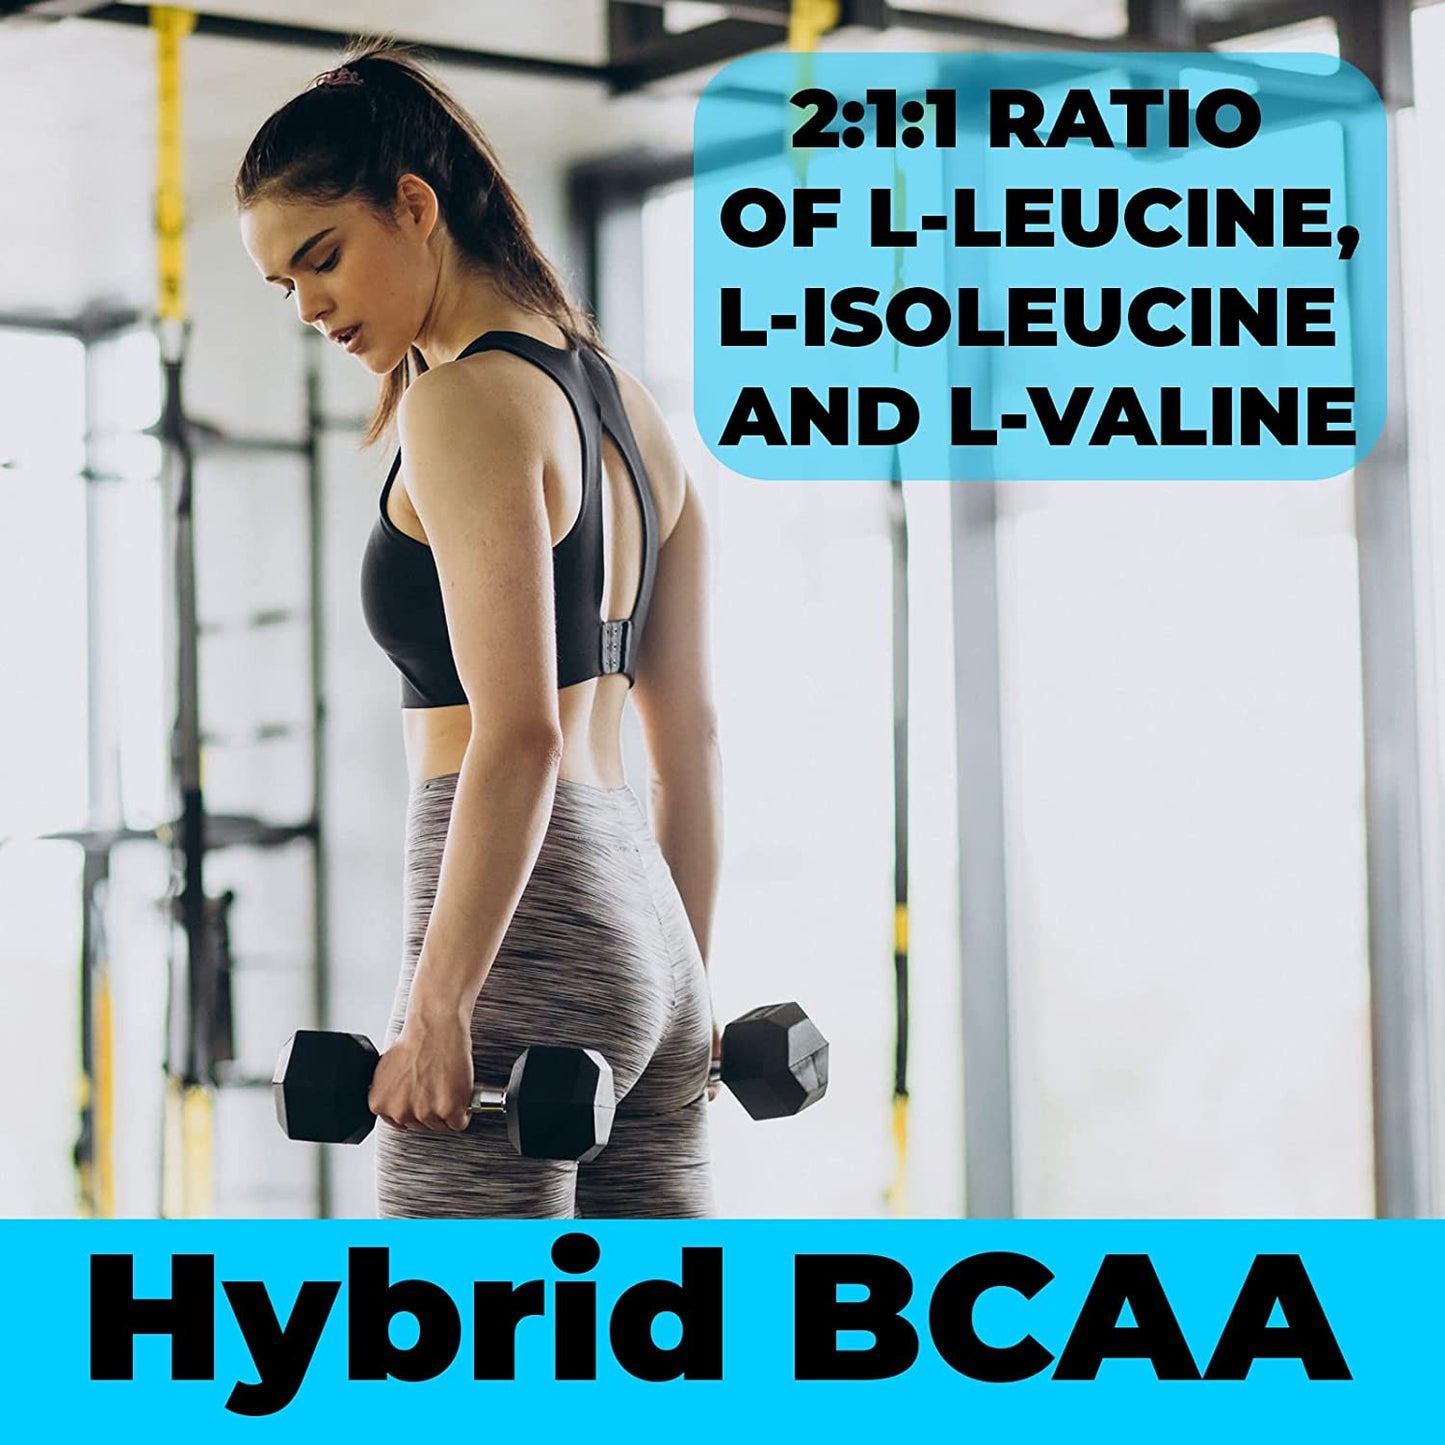 Hybrid BCAA Tablets 1000mg - 2:1:1 Extra Strong Branched Chain Amino Acids Supplements